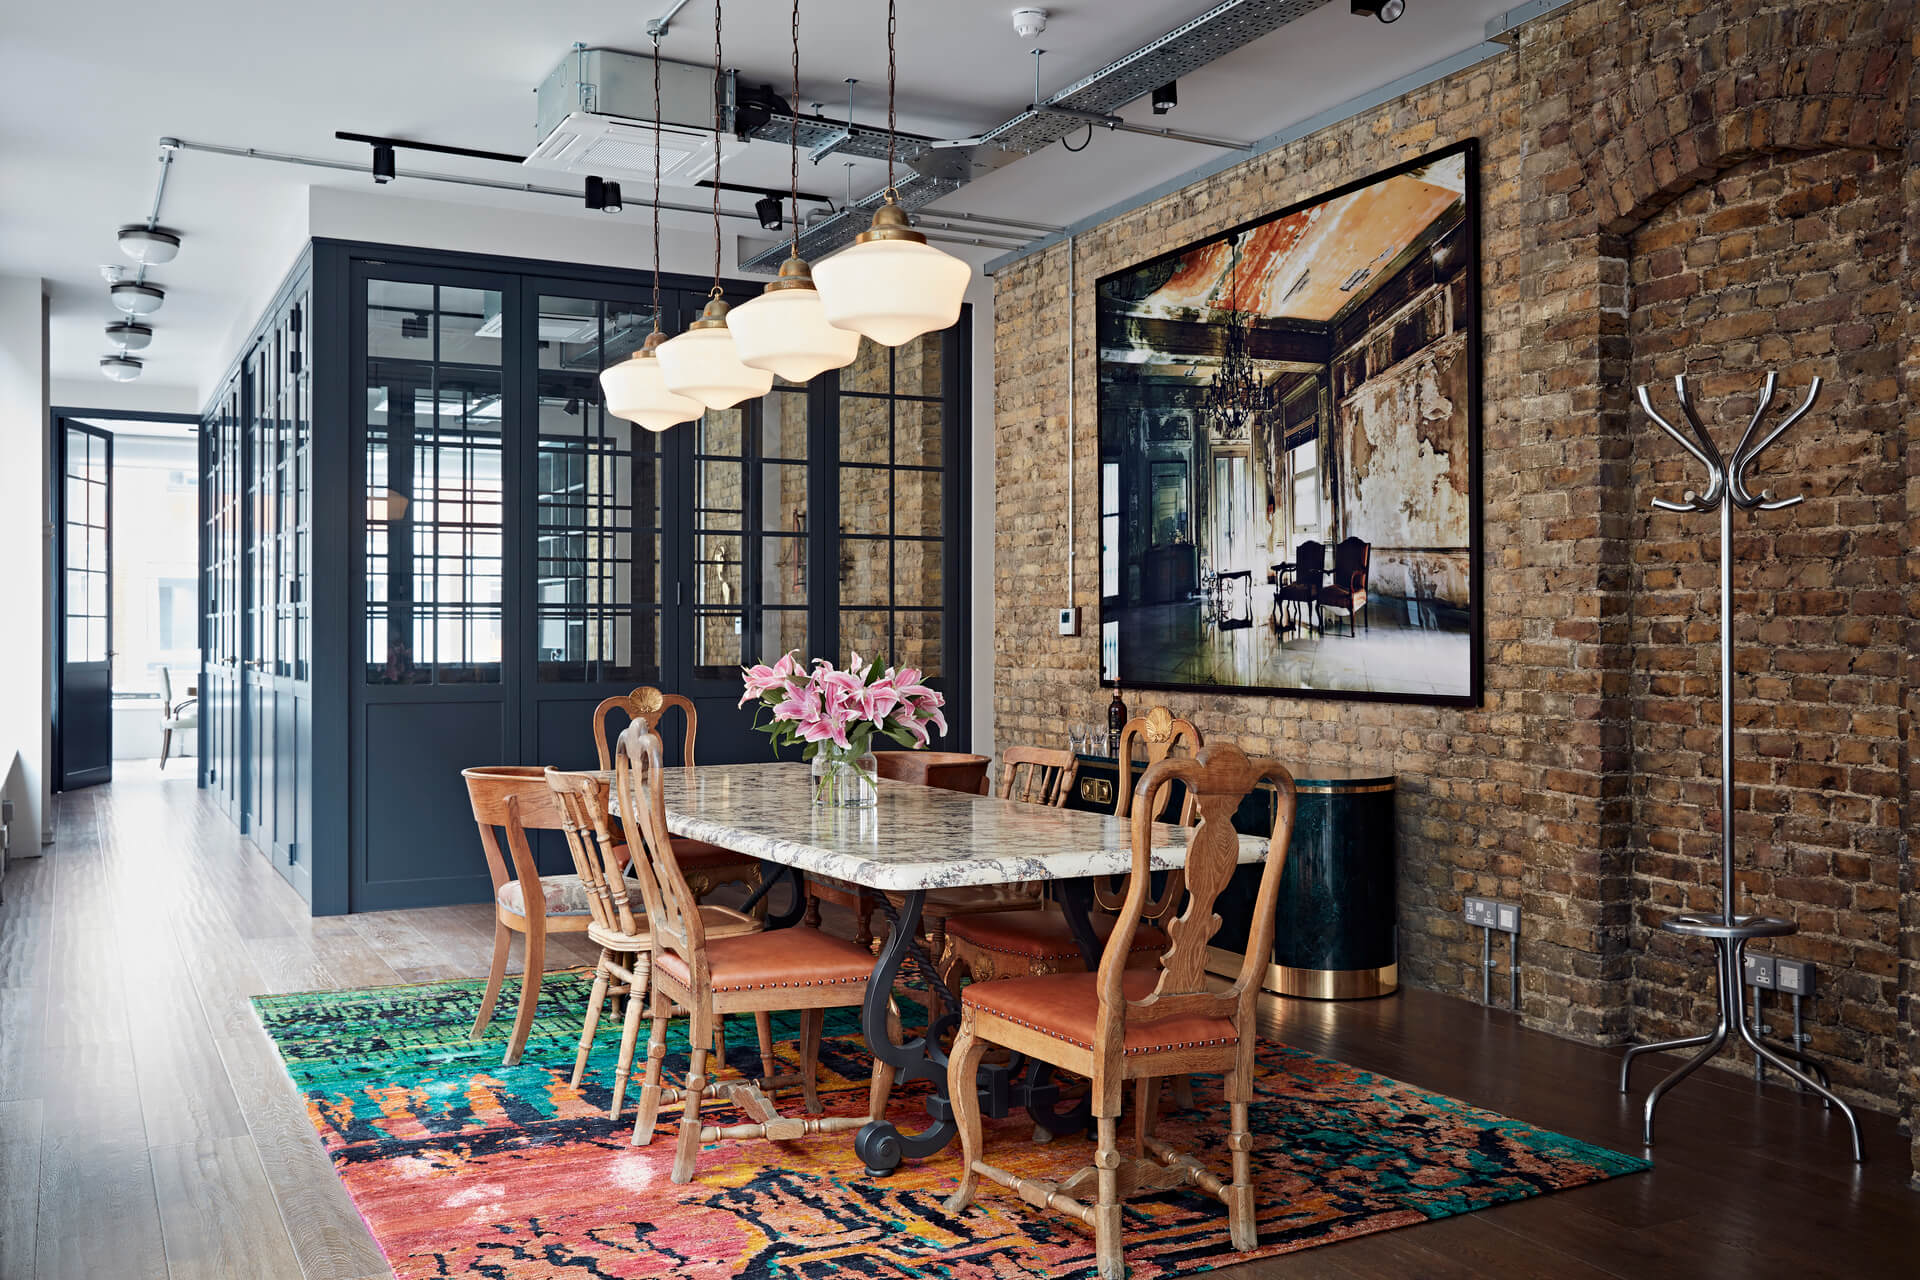 Luxury interior design of London office with marble table, vintage wooden chairs, colourful rug and large artwork on the exposed brick wall.